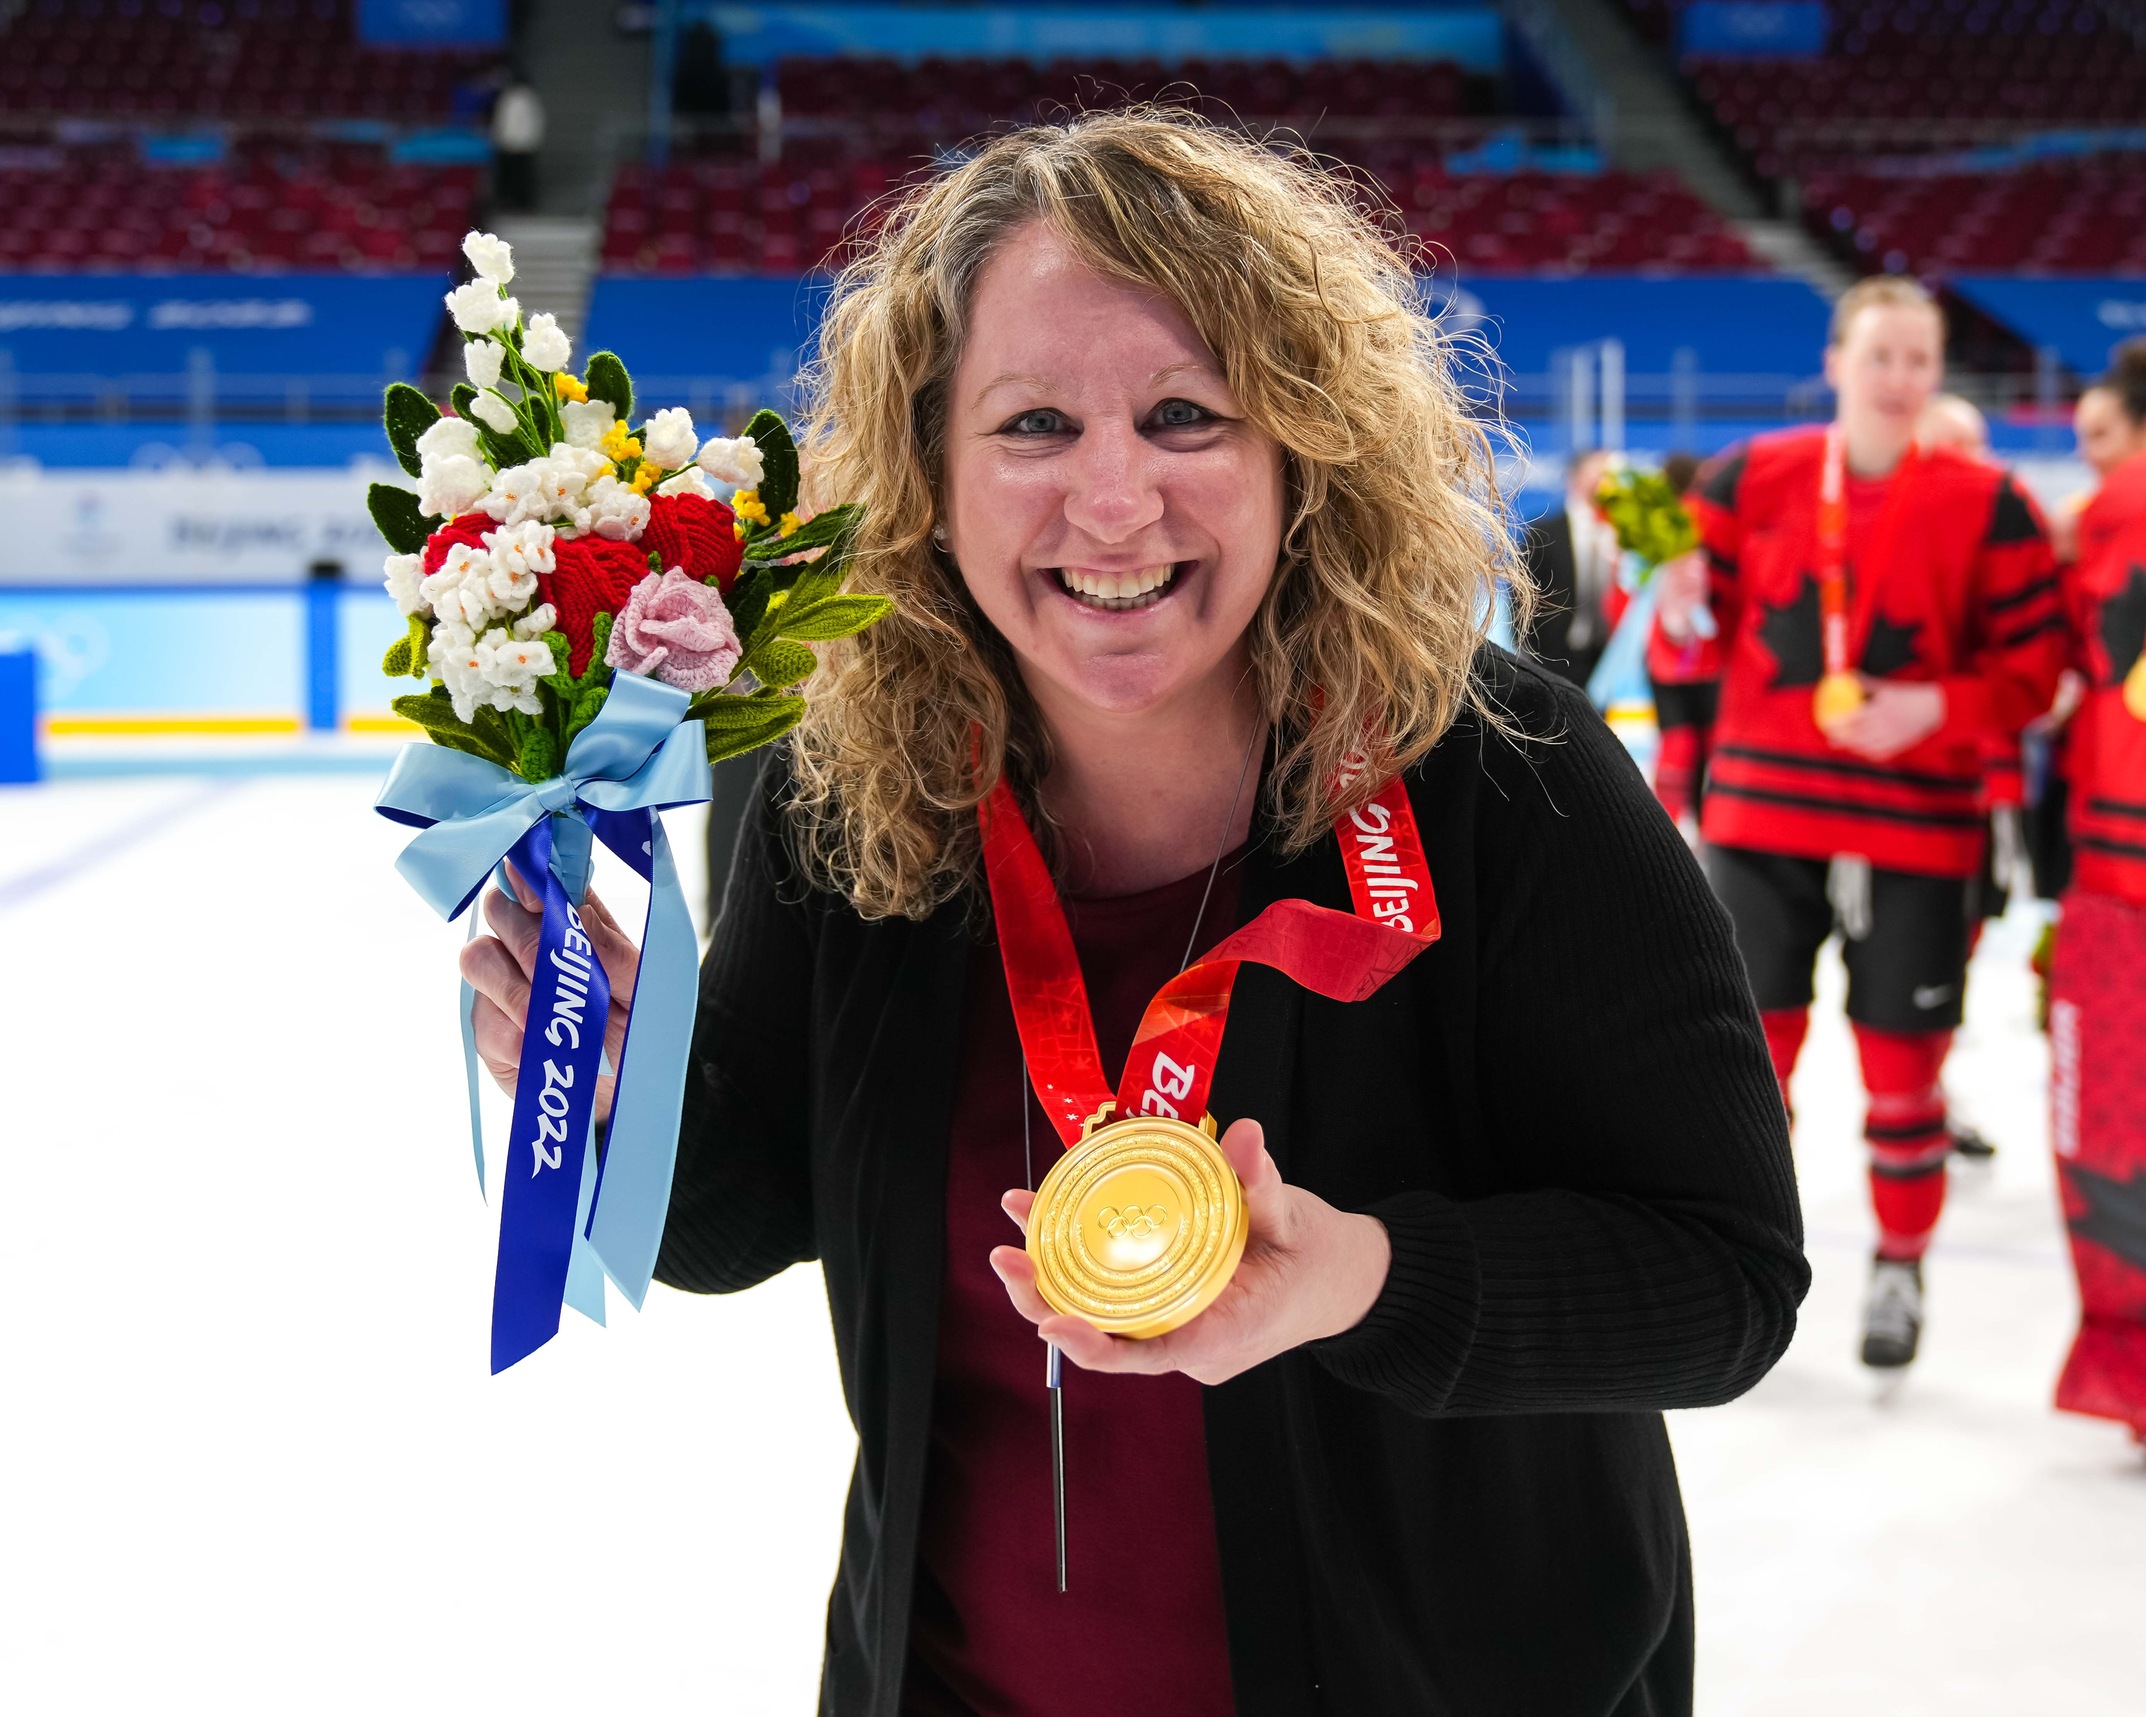 Kim Thompson holding her Olympic gold medal with players on ice behind her.